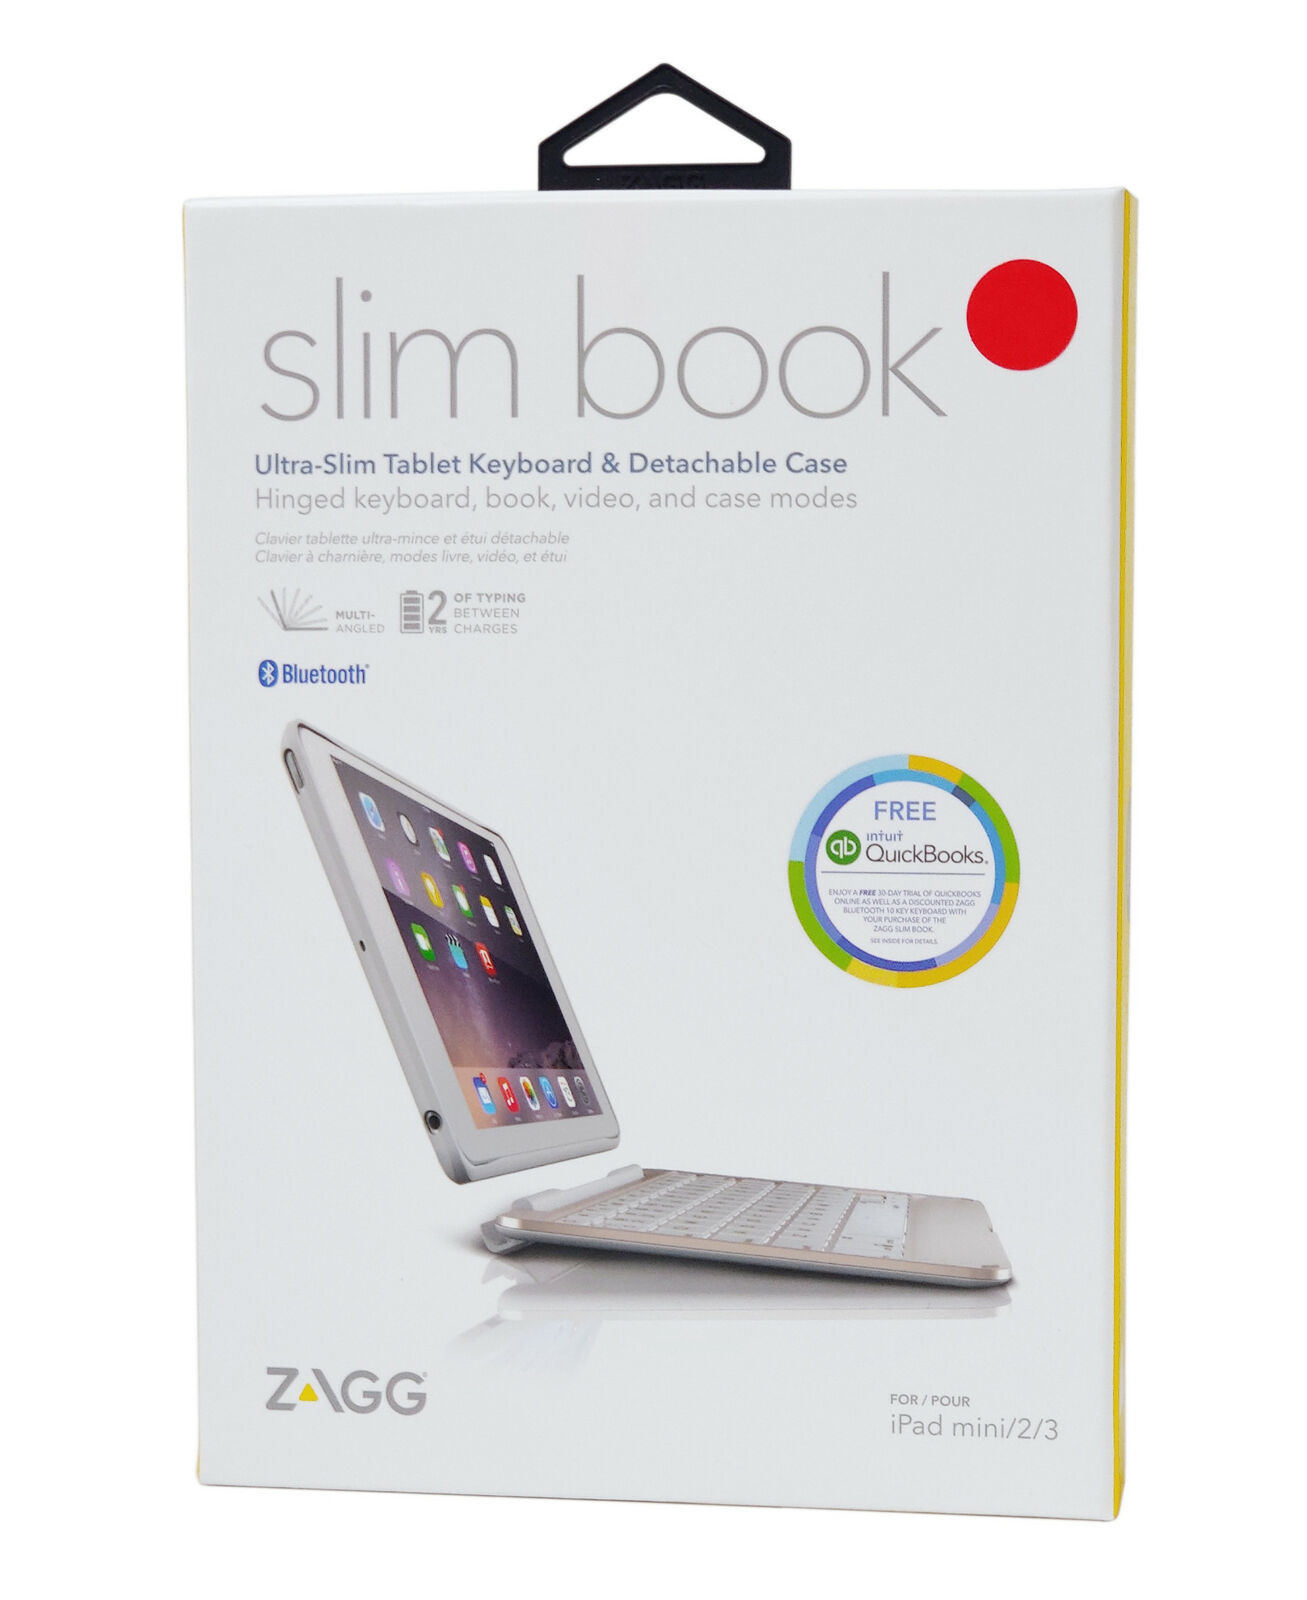 NEW Zagg Slim Book Rose Gold Bluetooth Keyboard Tablet Case for iPad Mini 2/3 - $28.17